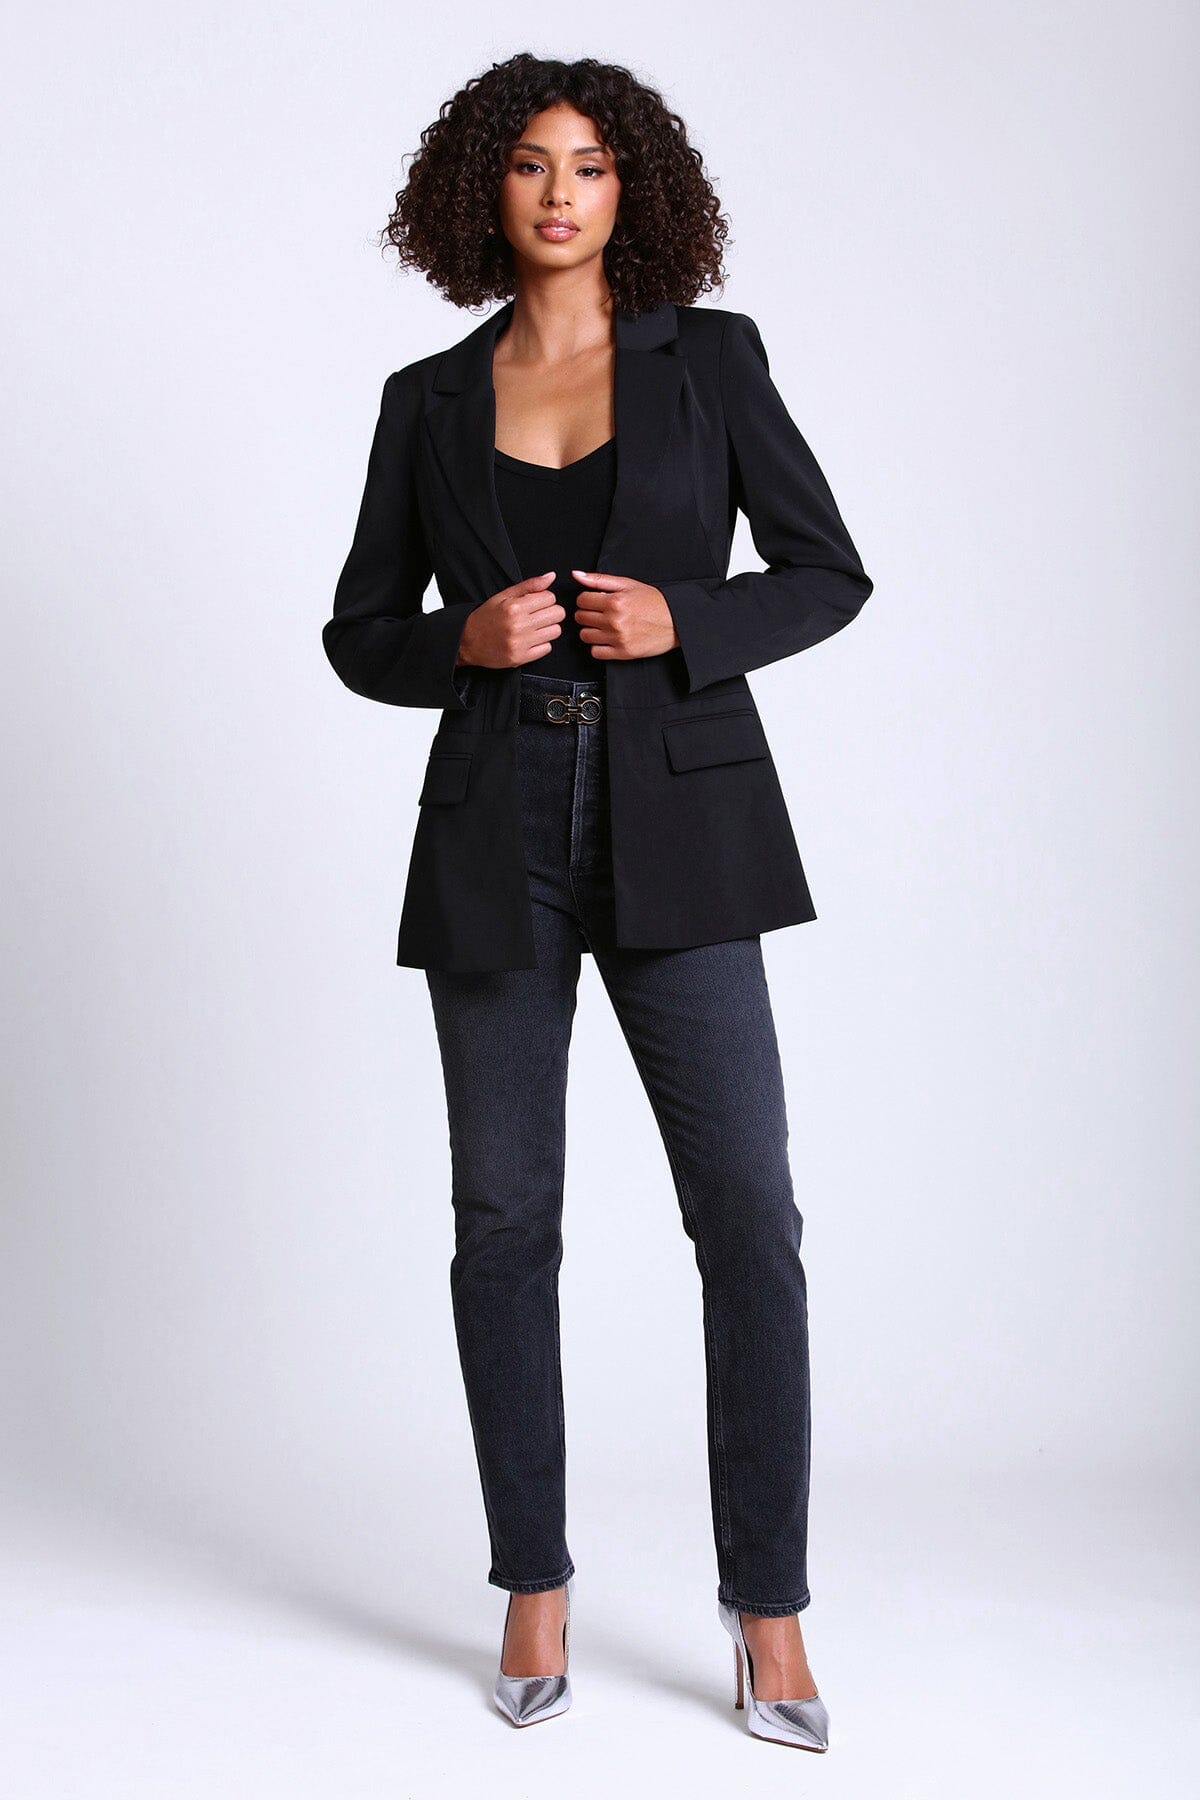 black tailored corset fitted cinched blazer jacket - women's figure flattering office to date night coats blazers jackets